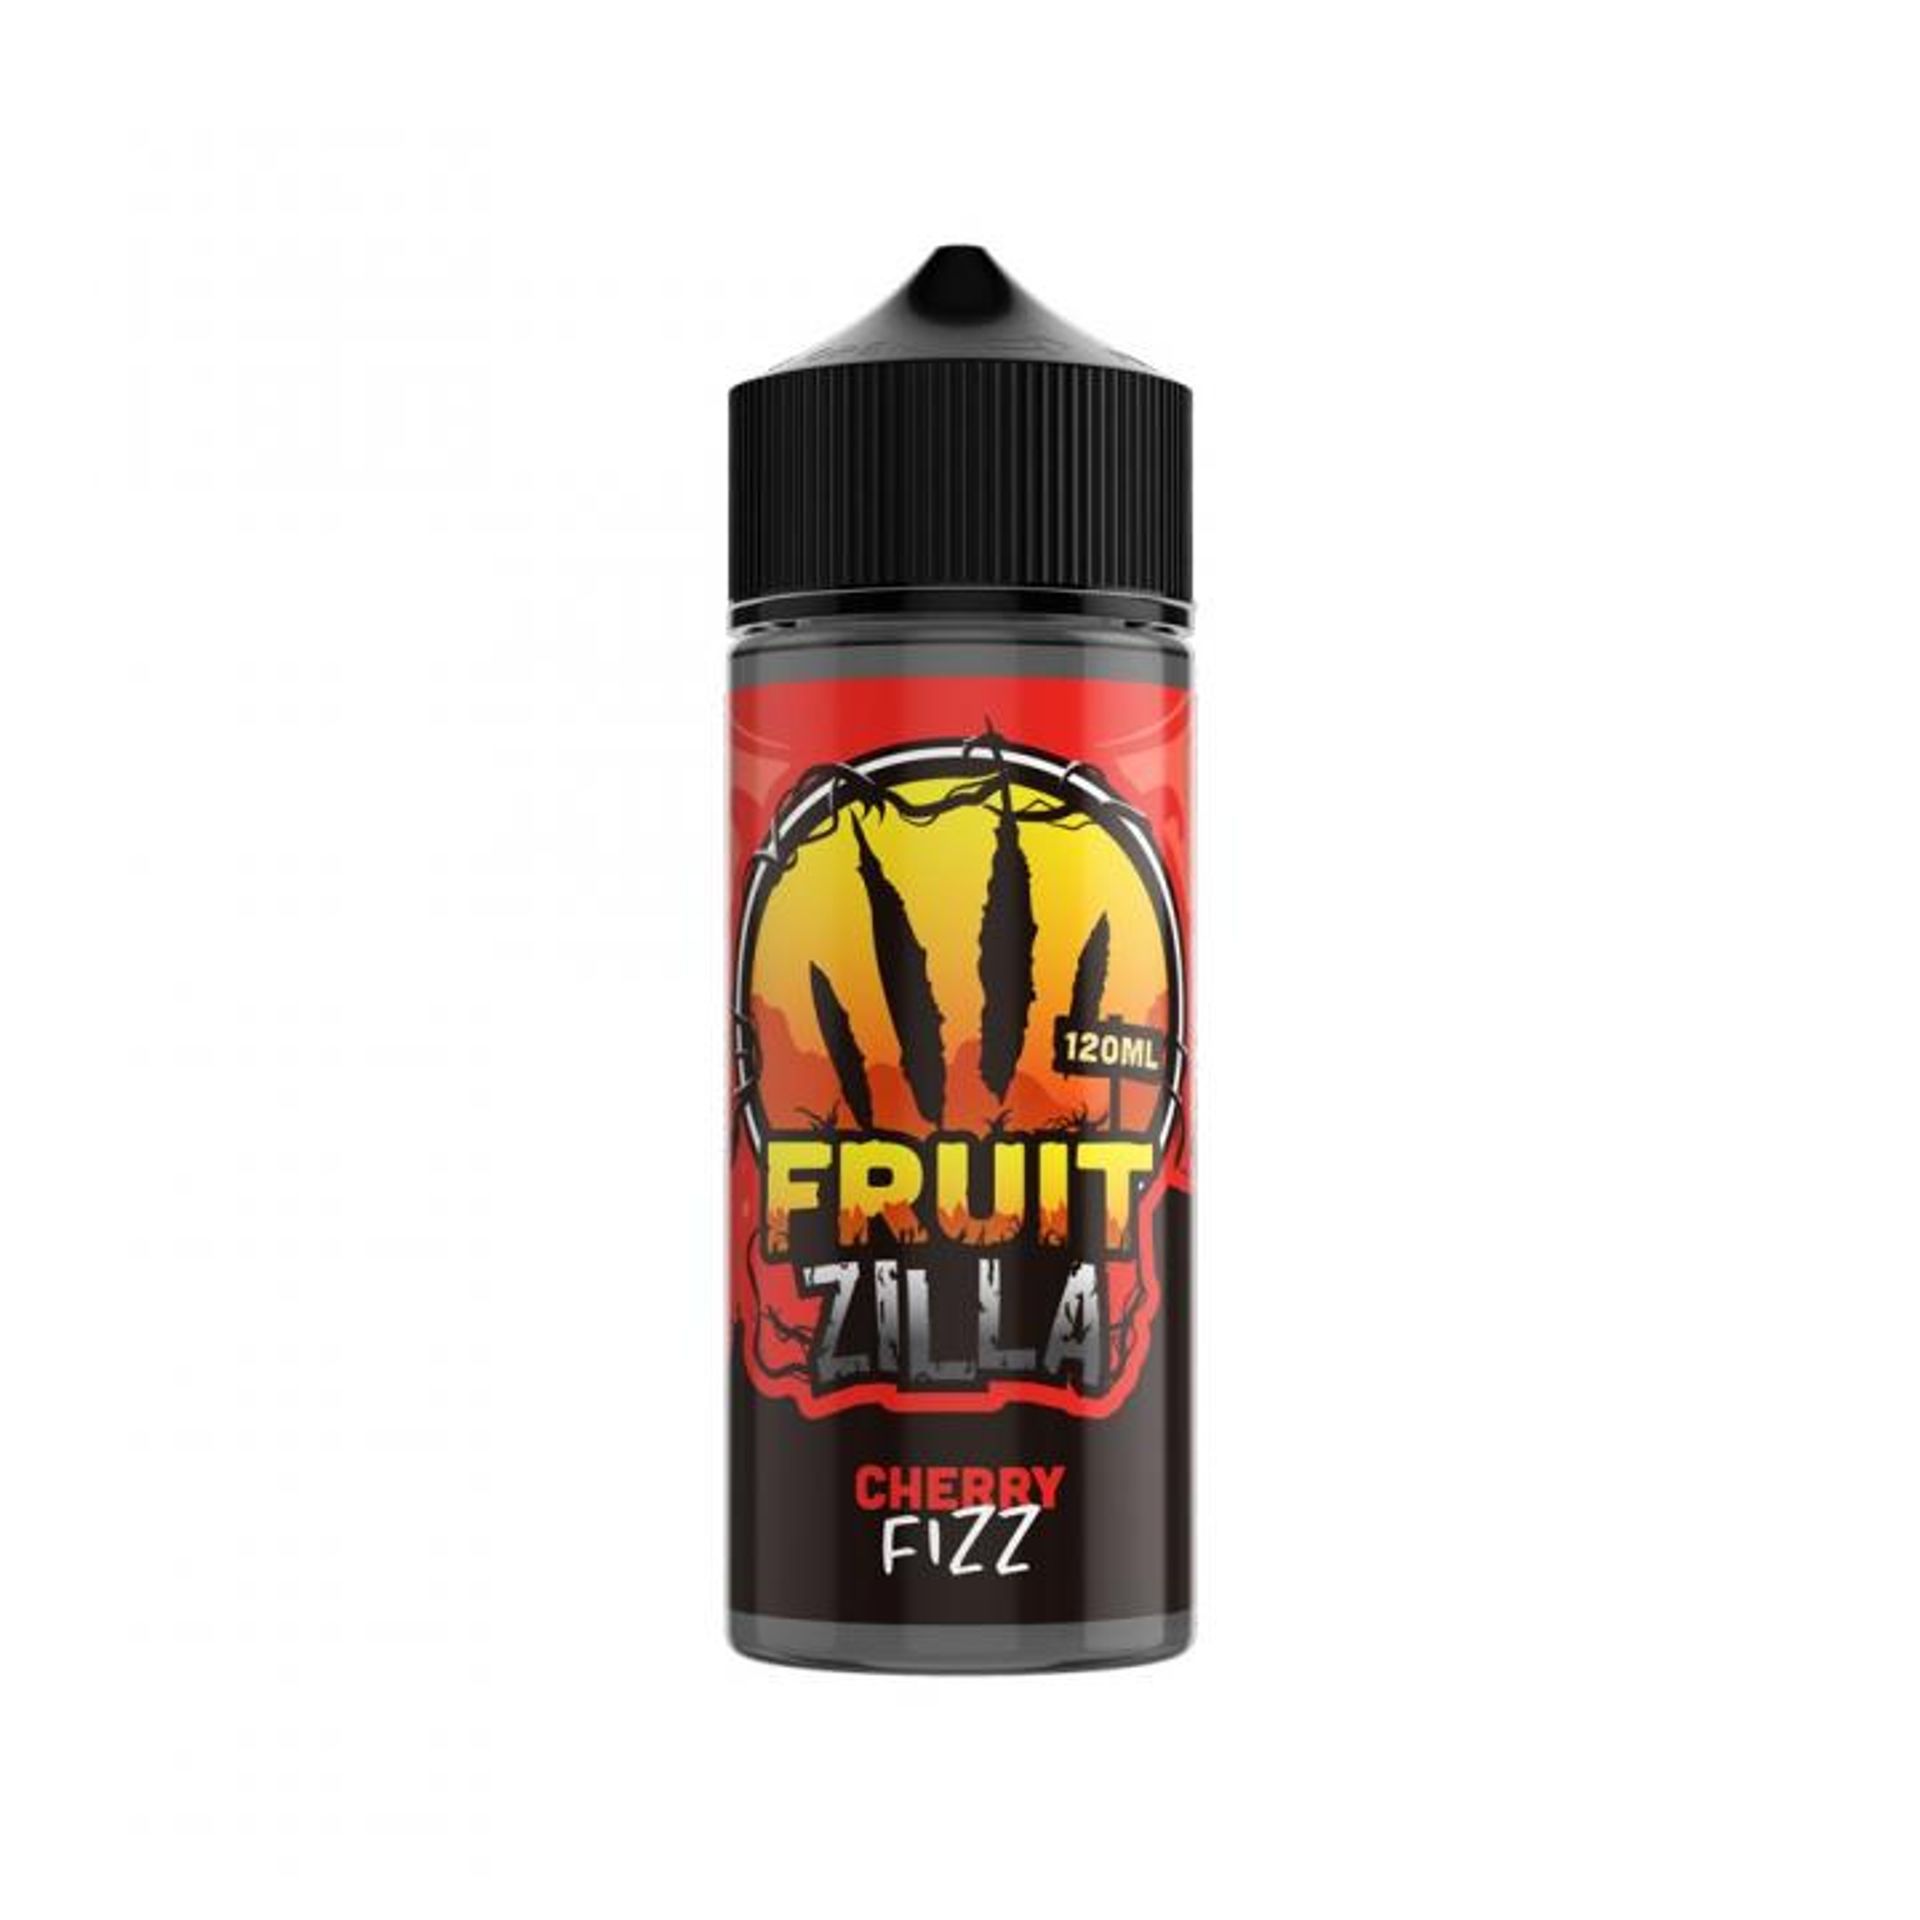 Image of Cherry Fizz by Fruit Zilla